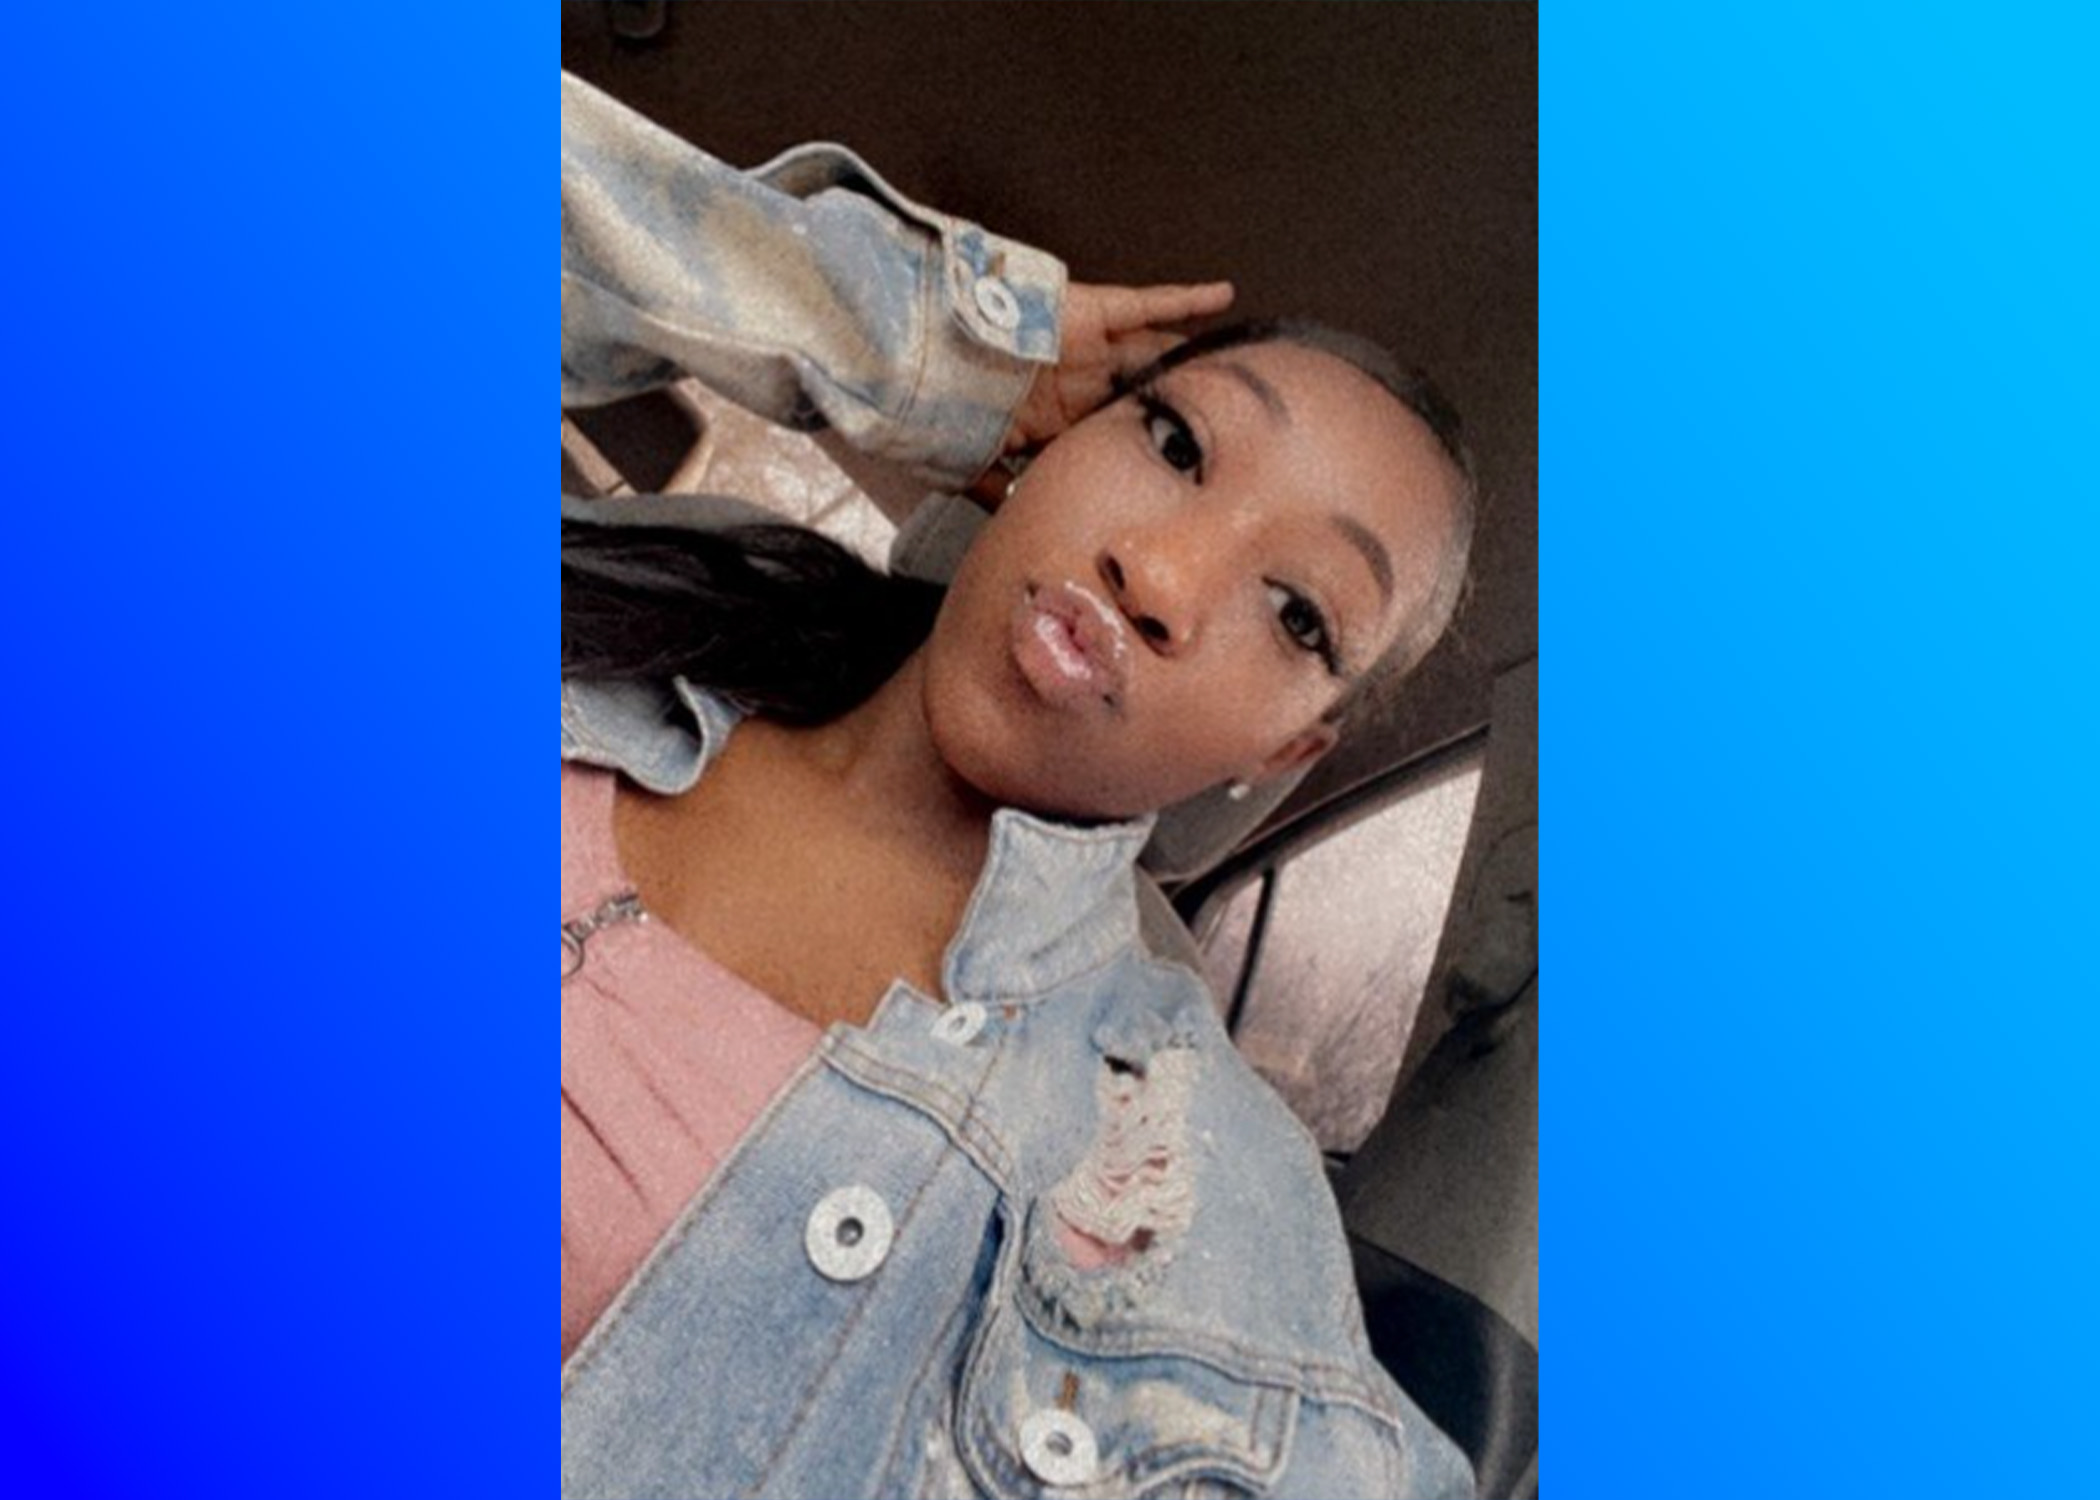 JeffCo Deputies search for missing 15-year-old